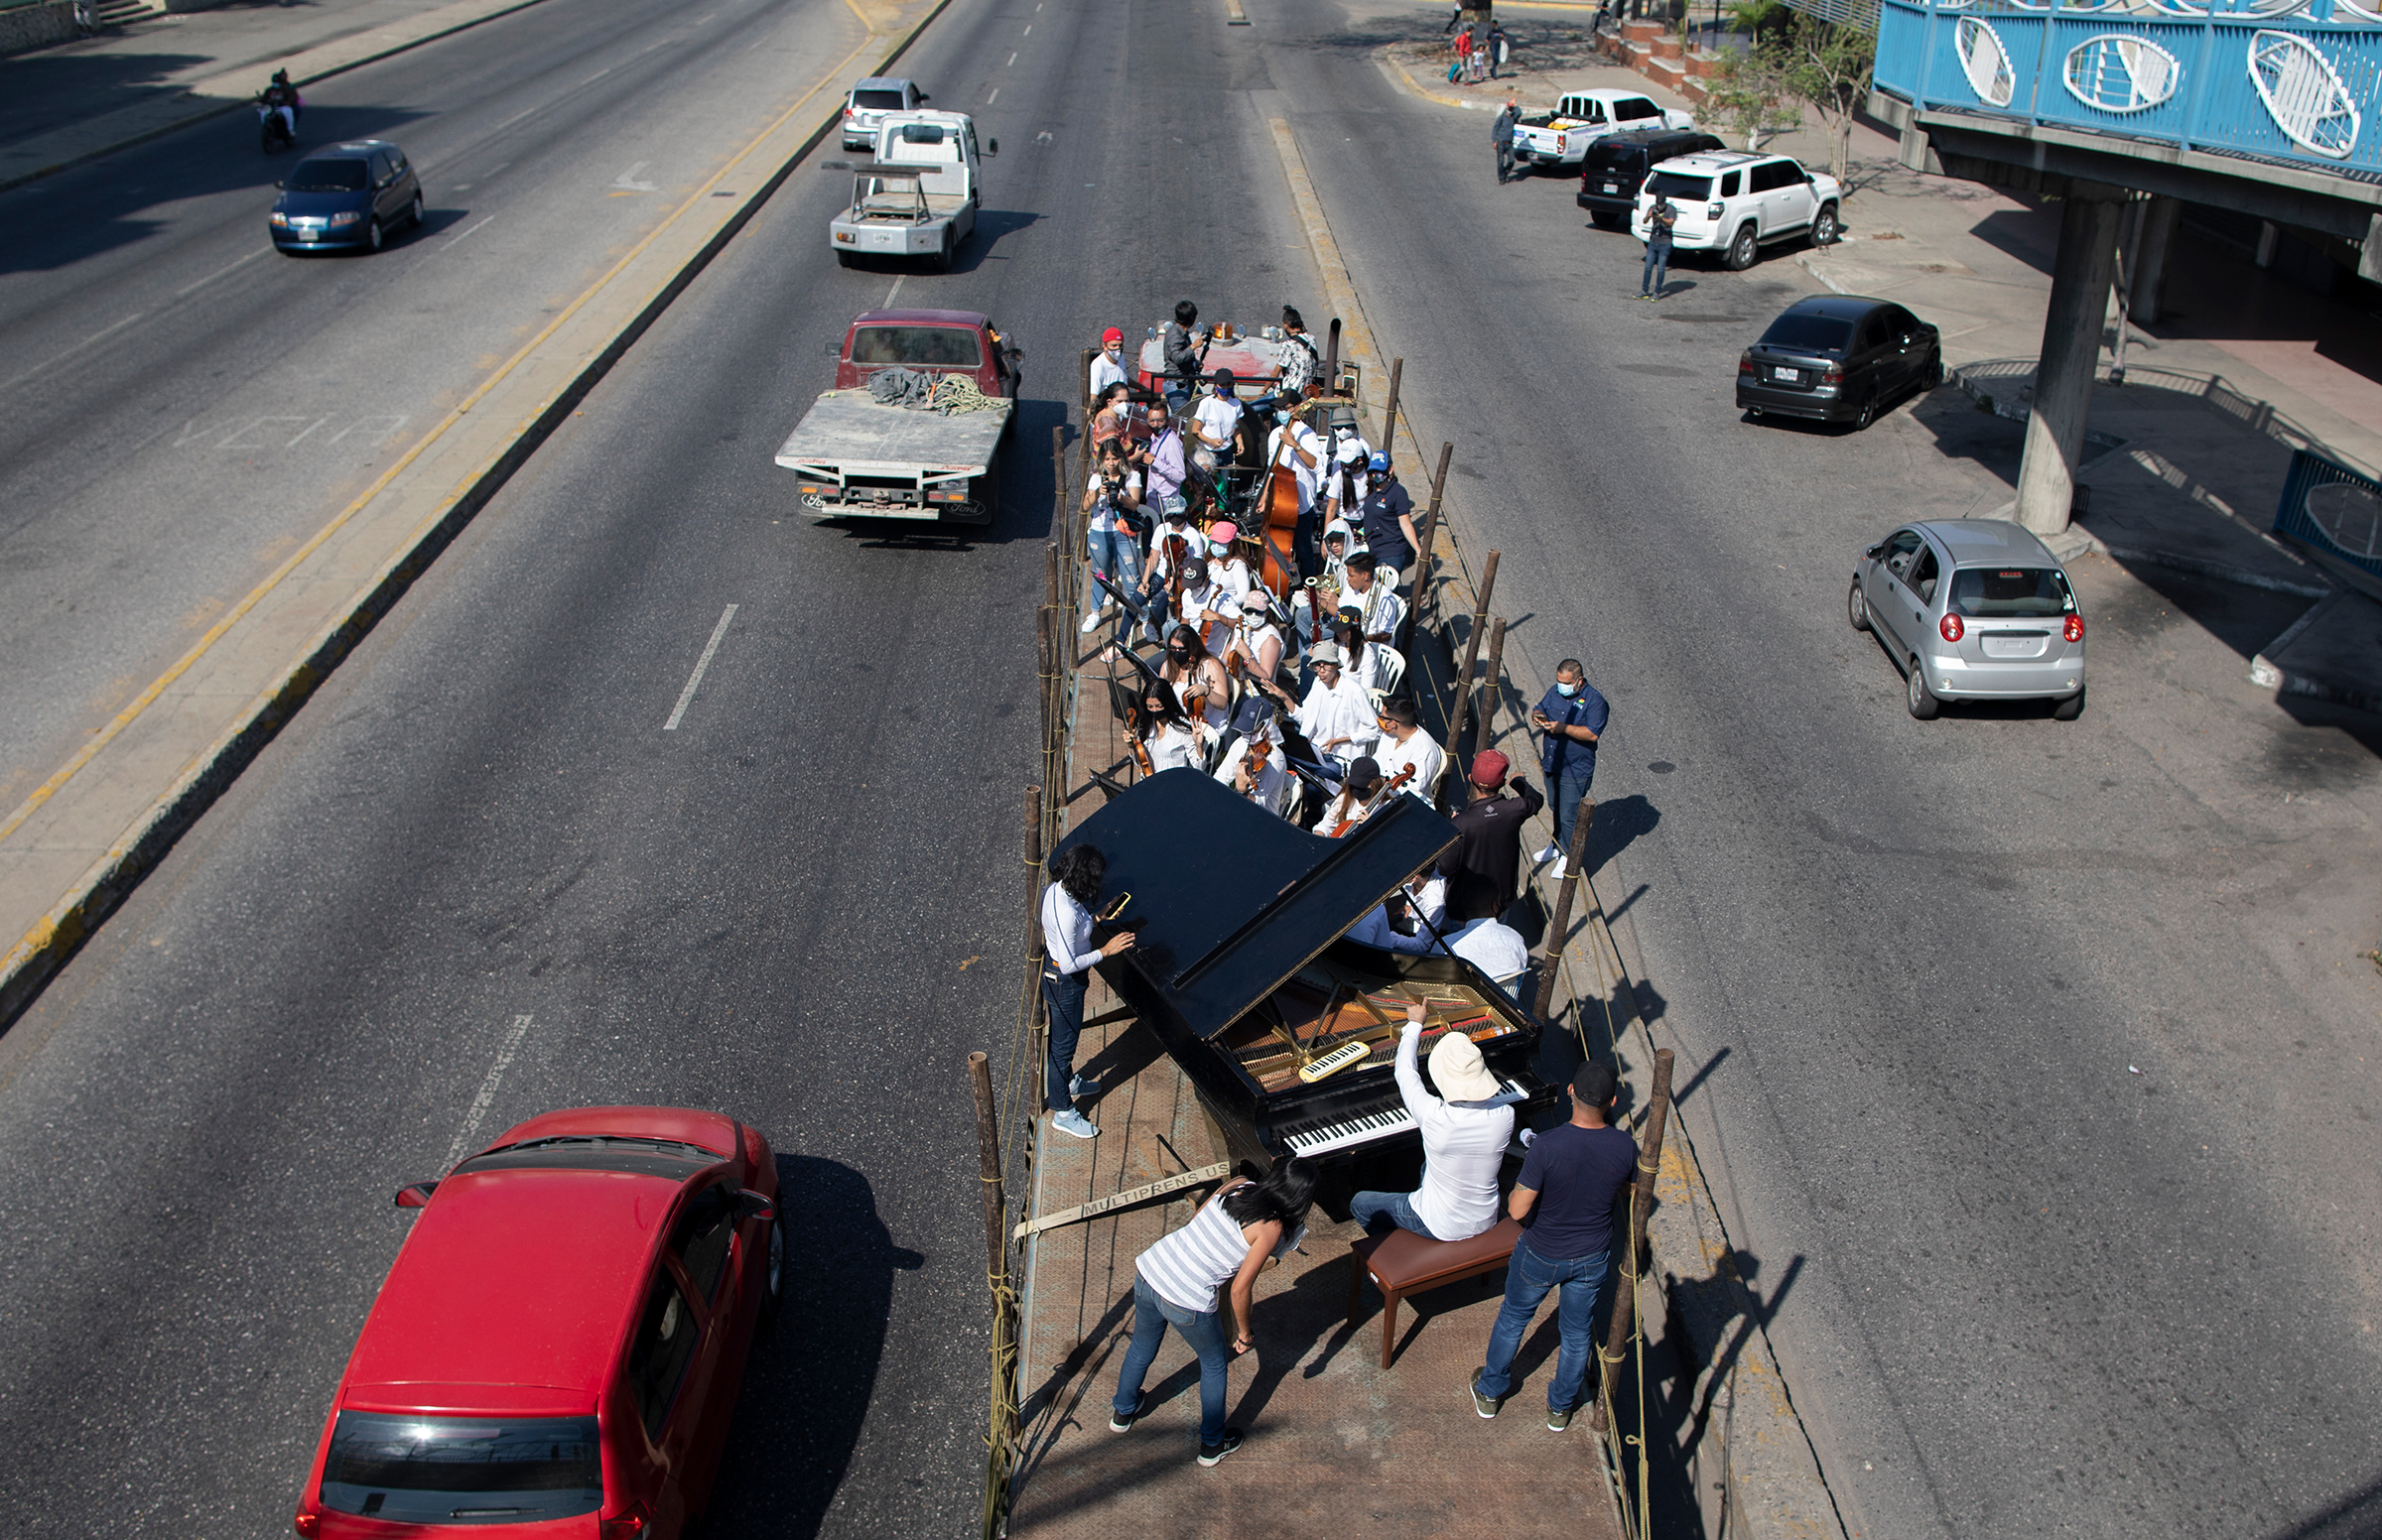 Musicians join pianist, composer and conductor José Agustín Sánchez on a truck bed for a 